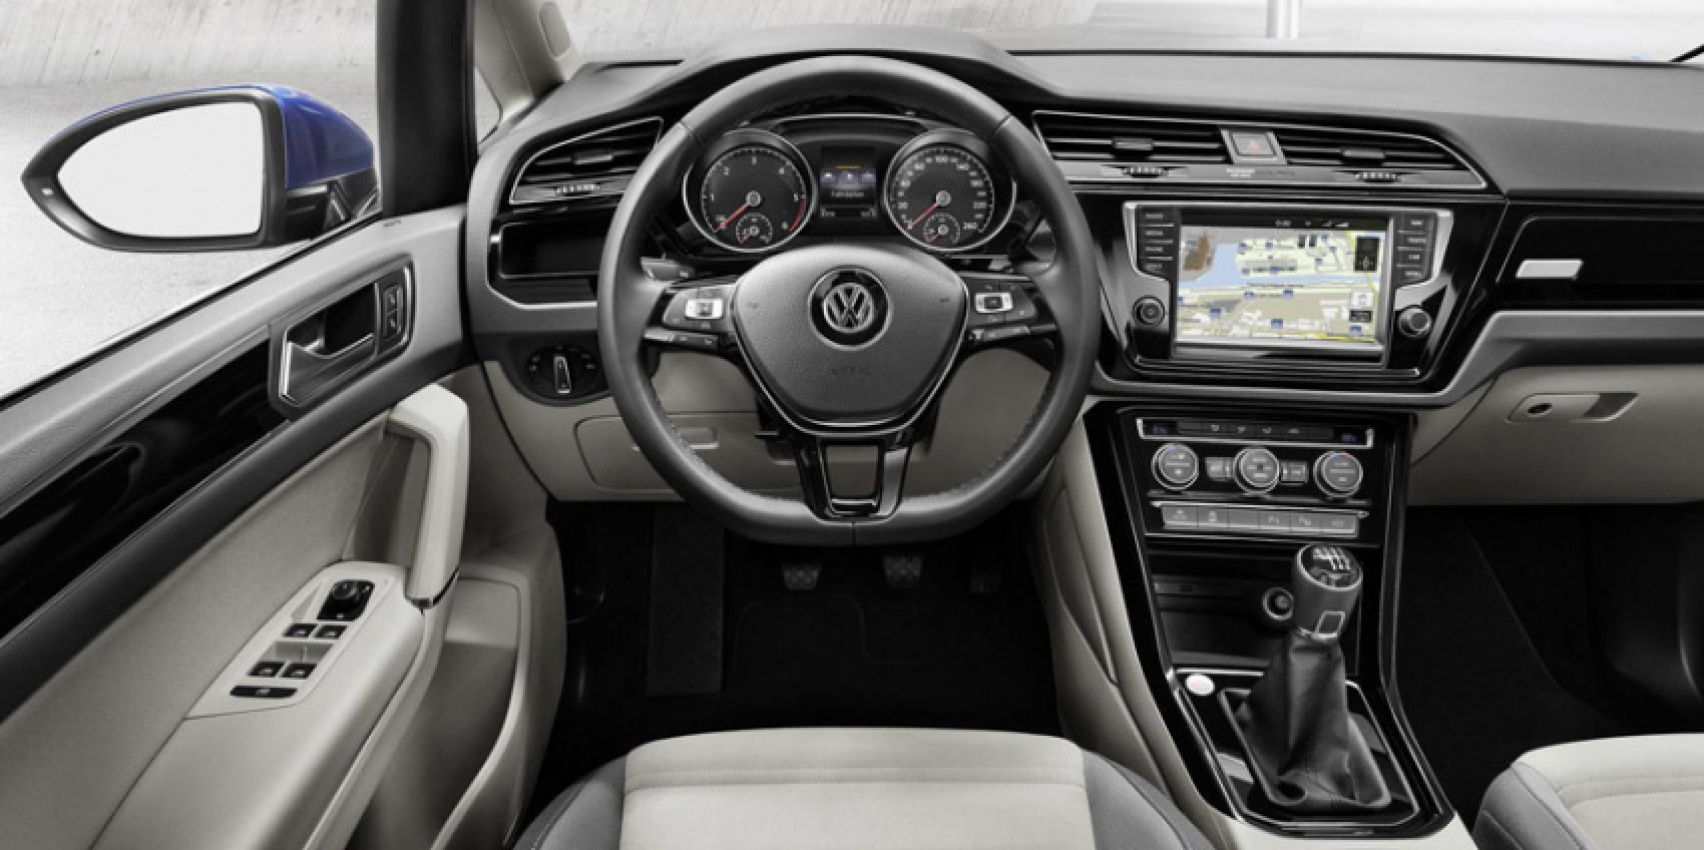 autos, cars, volkswagen, android, android, refreshed volkswagen touran is available in showrooms